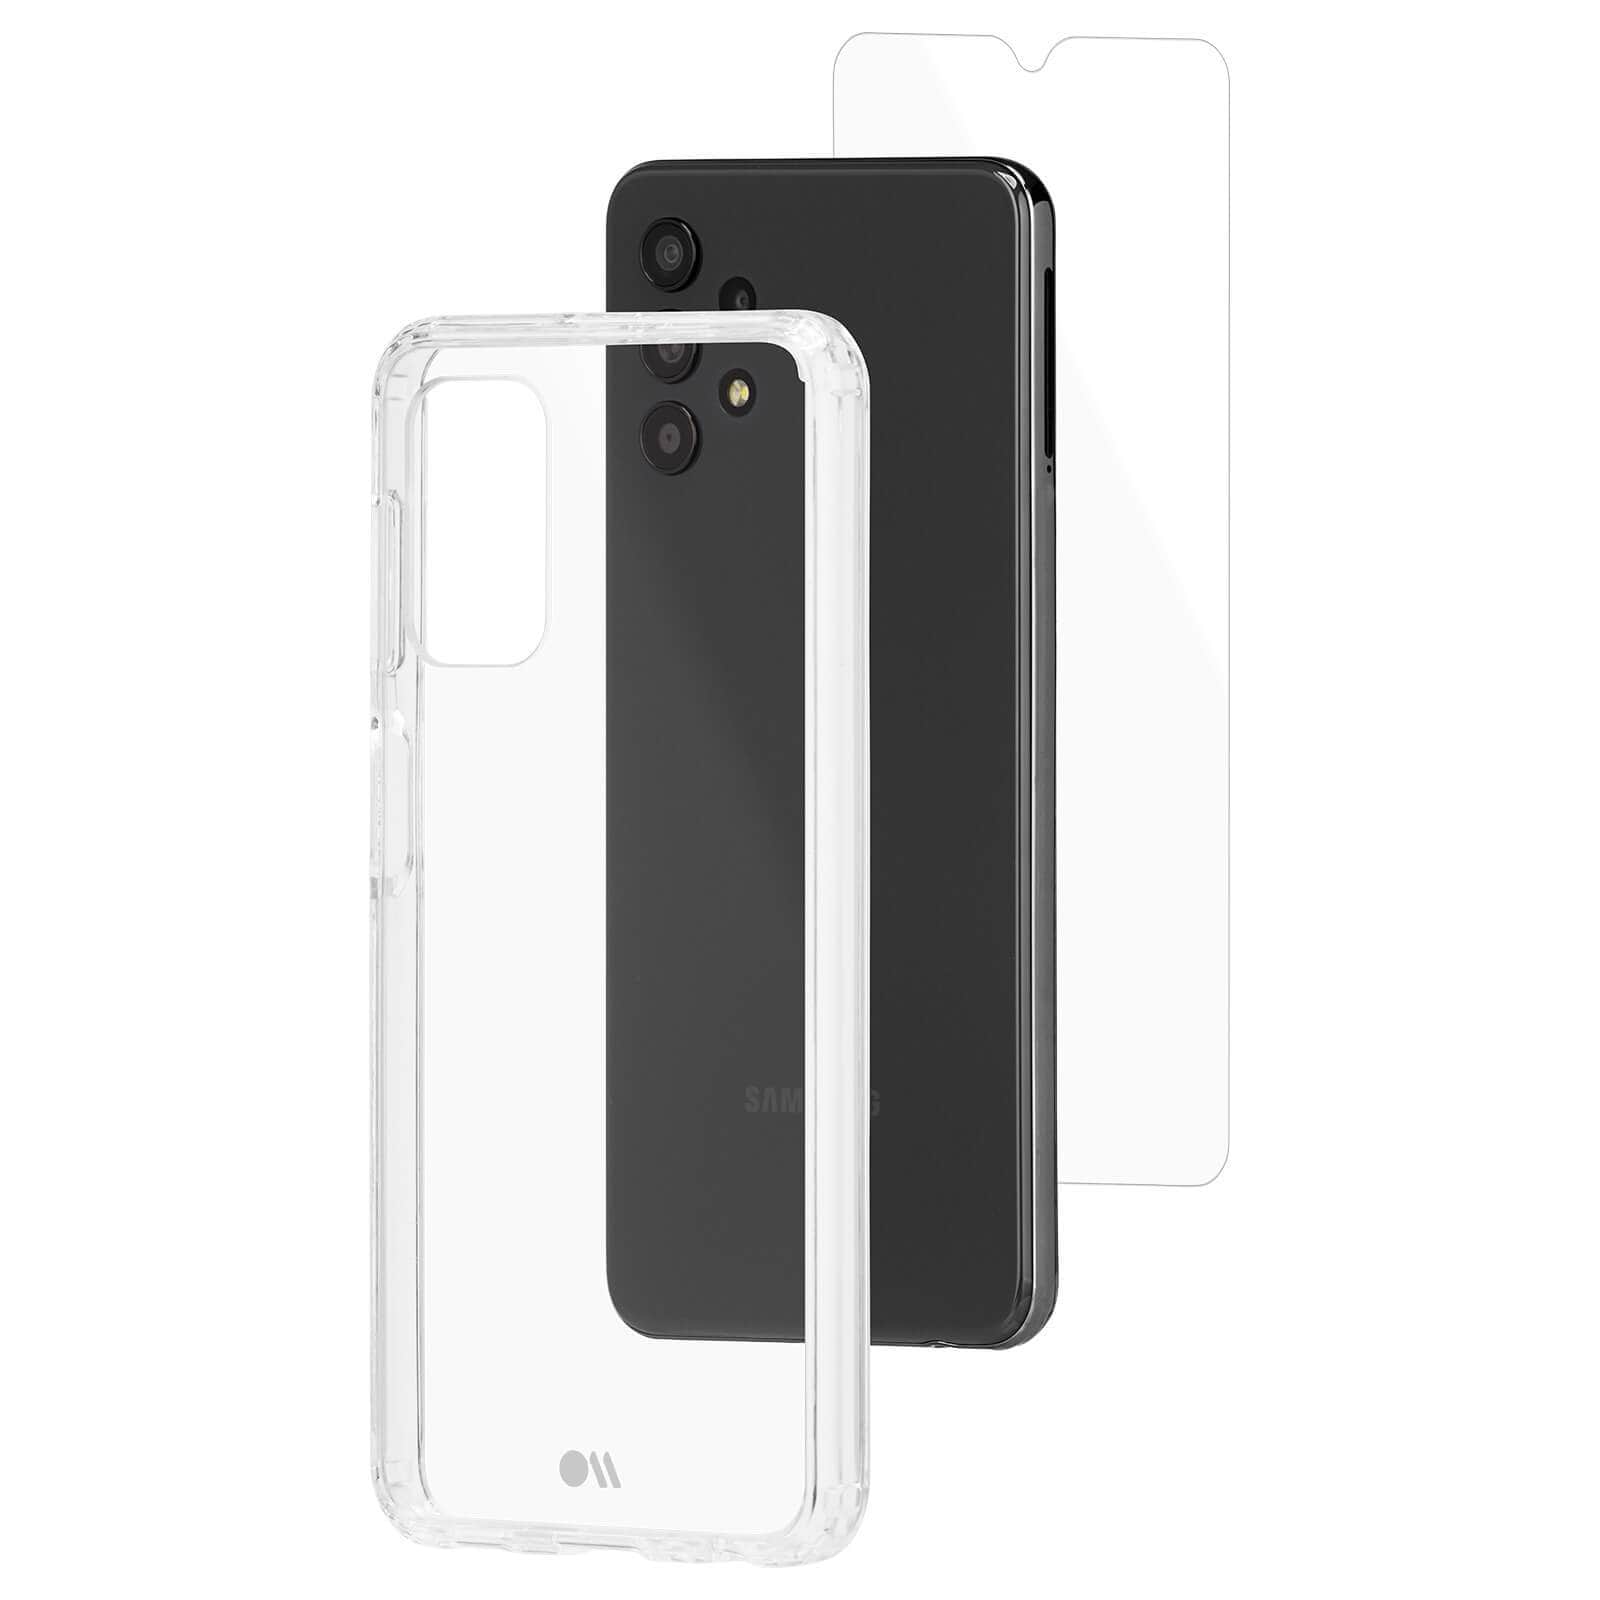 Slim profile case with heavy duty protection. color::Clear